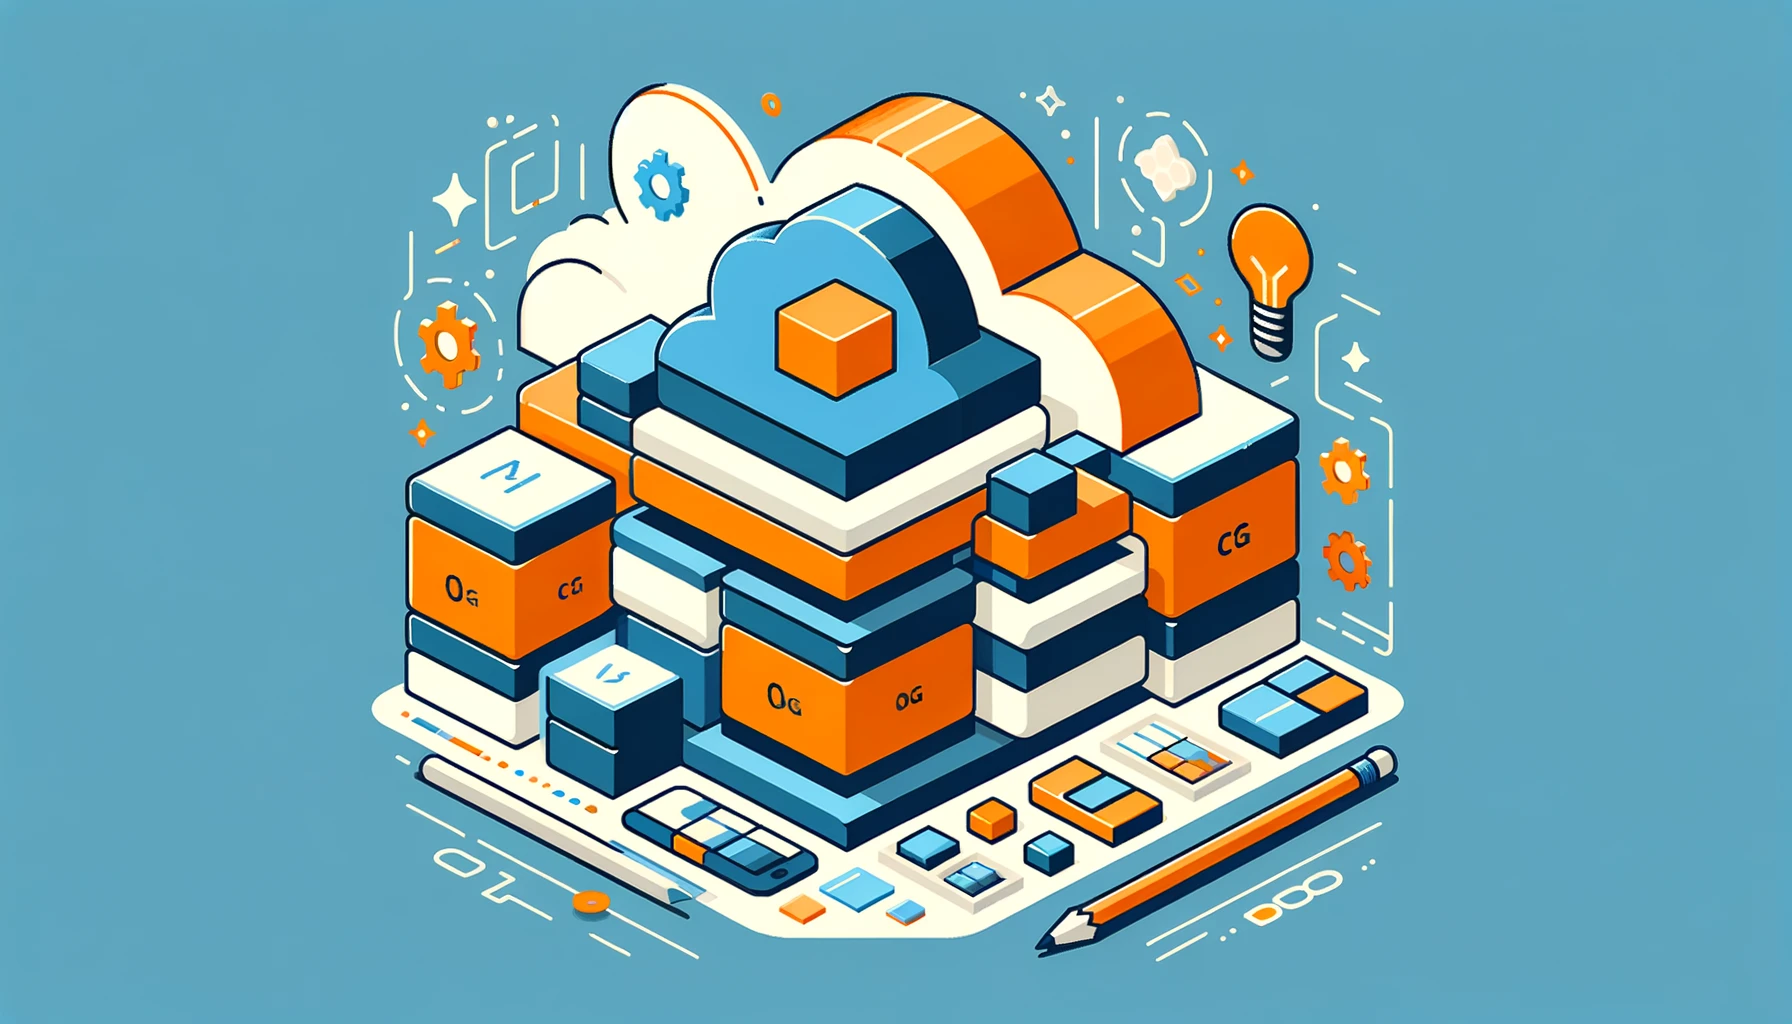 Open Graph image for an article on deleting a CDK stack in AWS, featuring AWS logo, cloud icons, and a visual metaphor of a stack with one block being removed, in AWS branding colors.